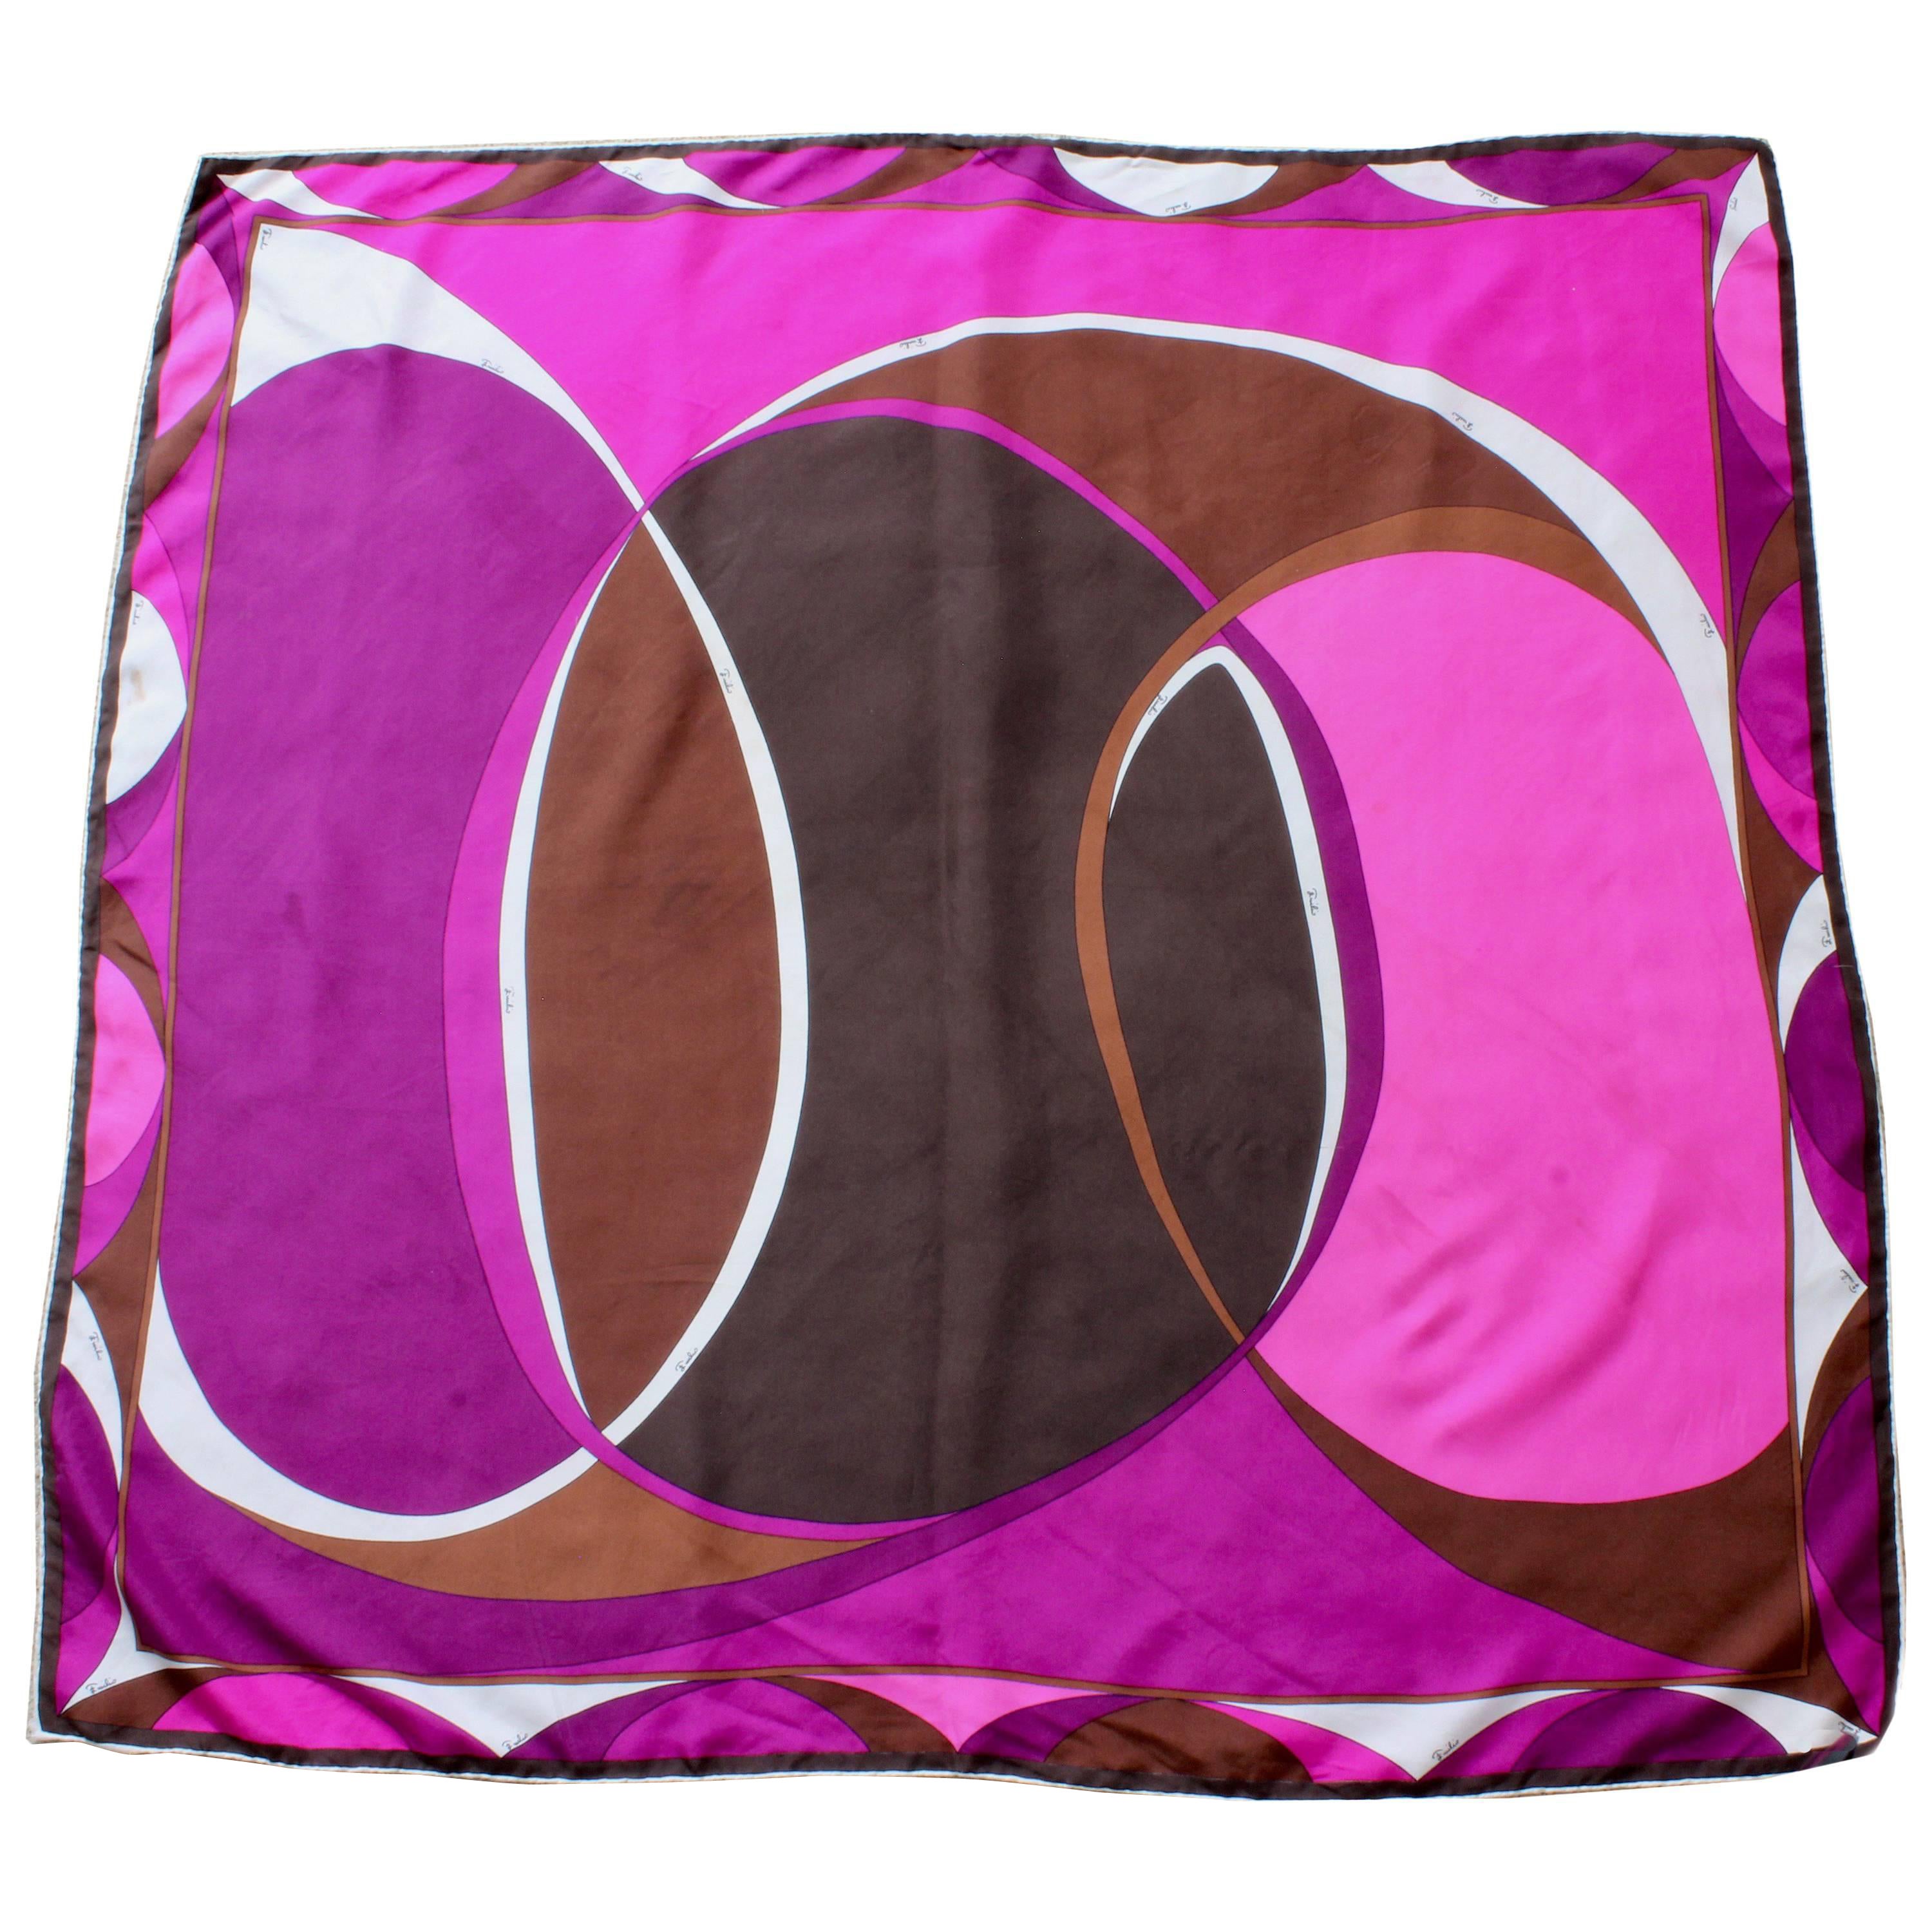 Emilio Pucci Abstract Print Scarf Shawl Silk Twill 35in Purple Brown Pink White For Sale